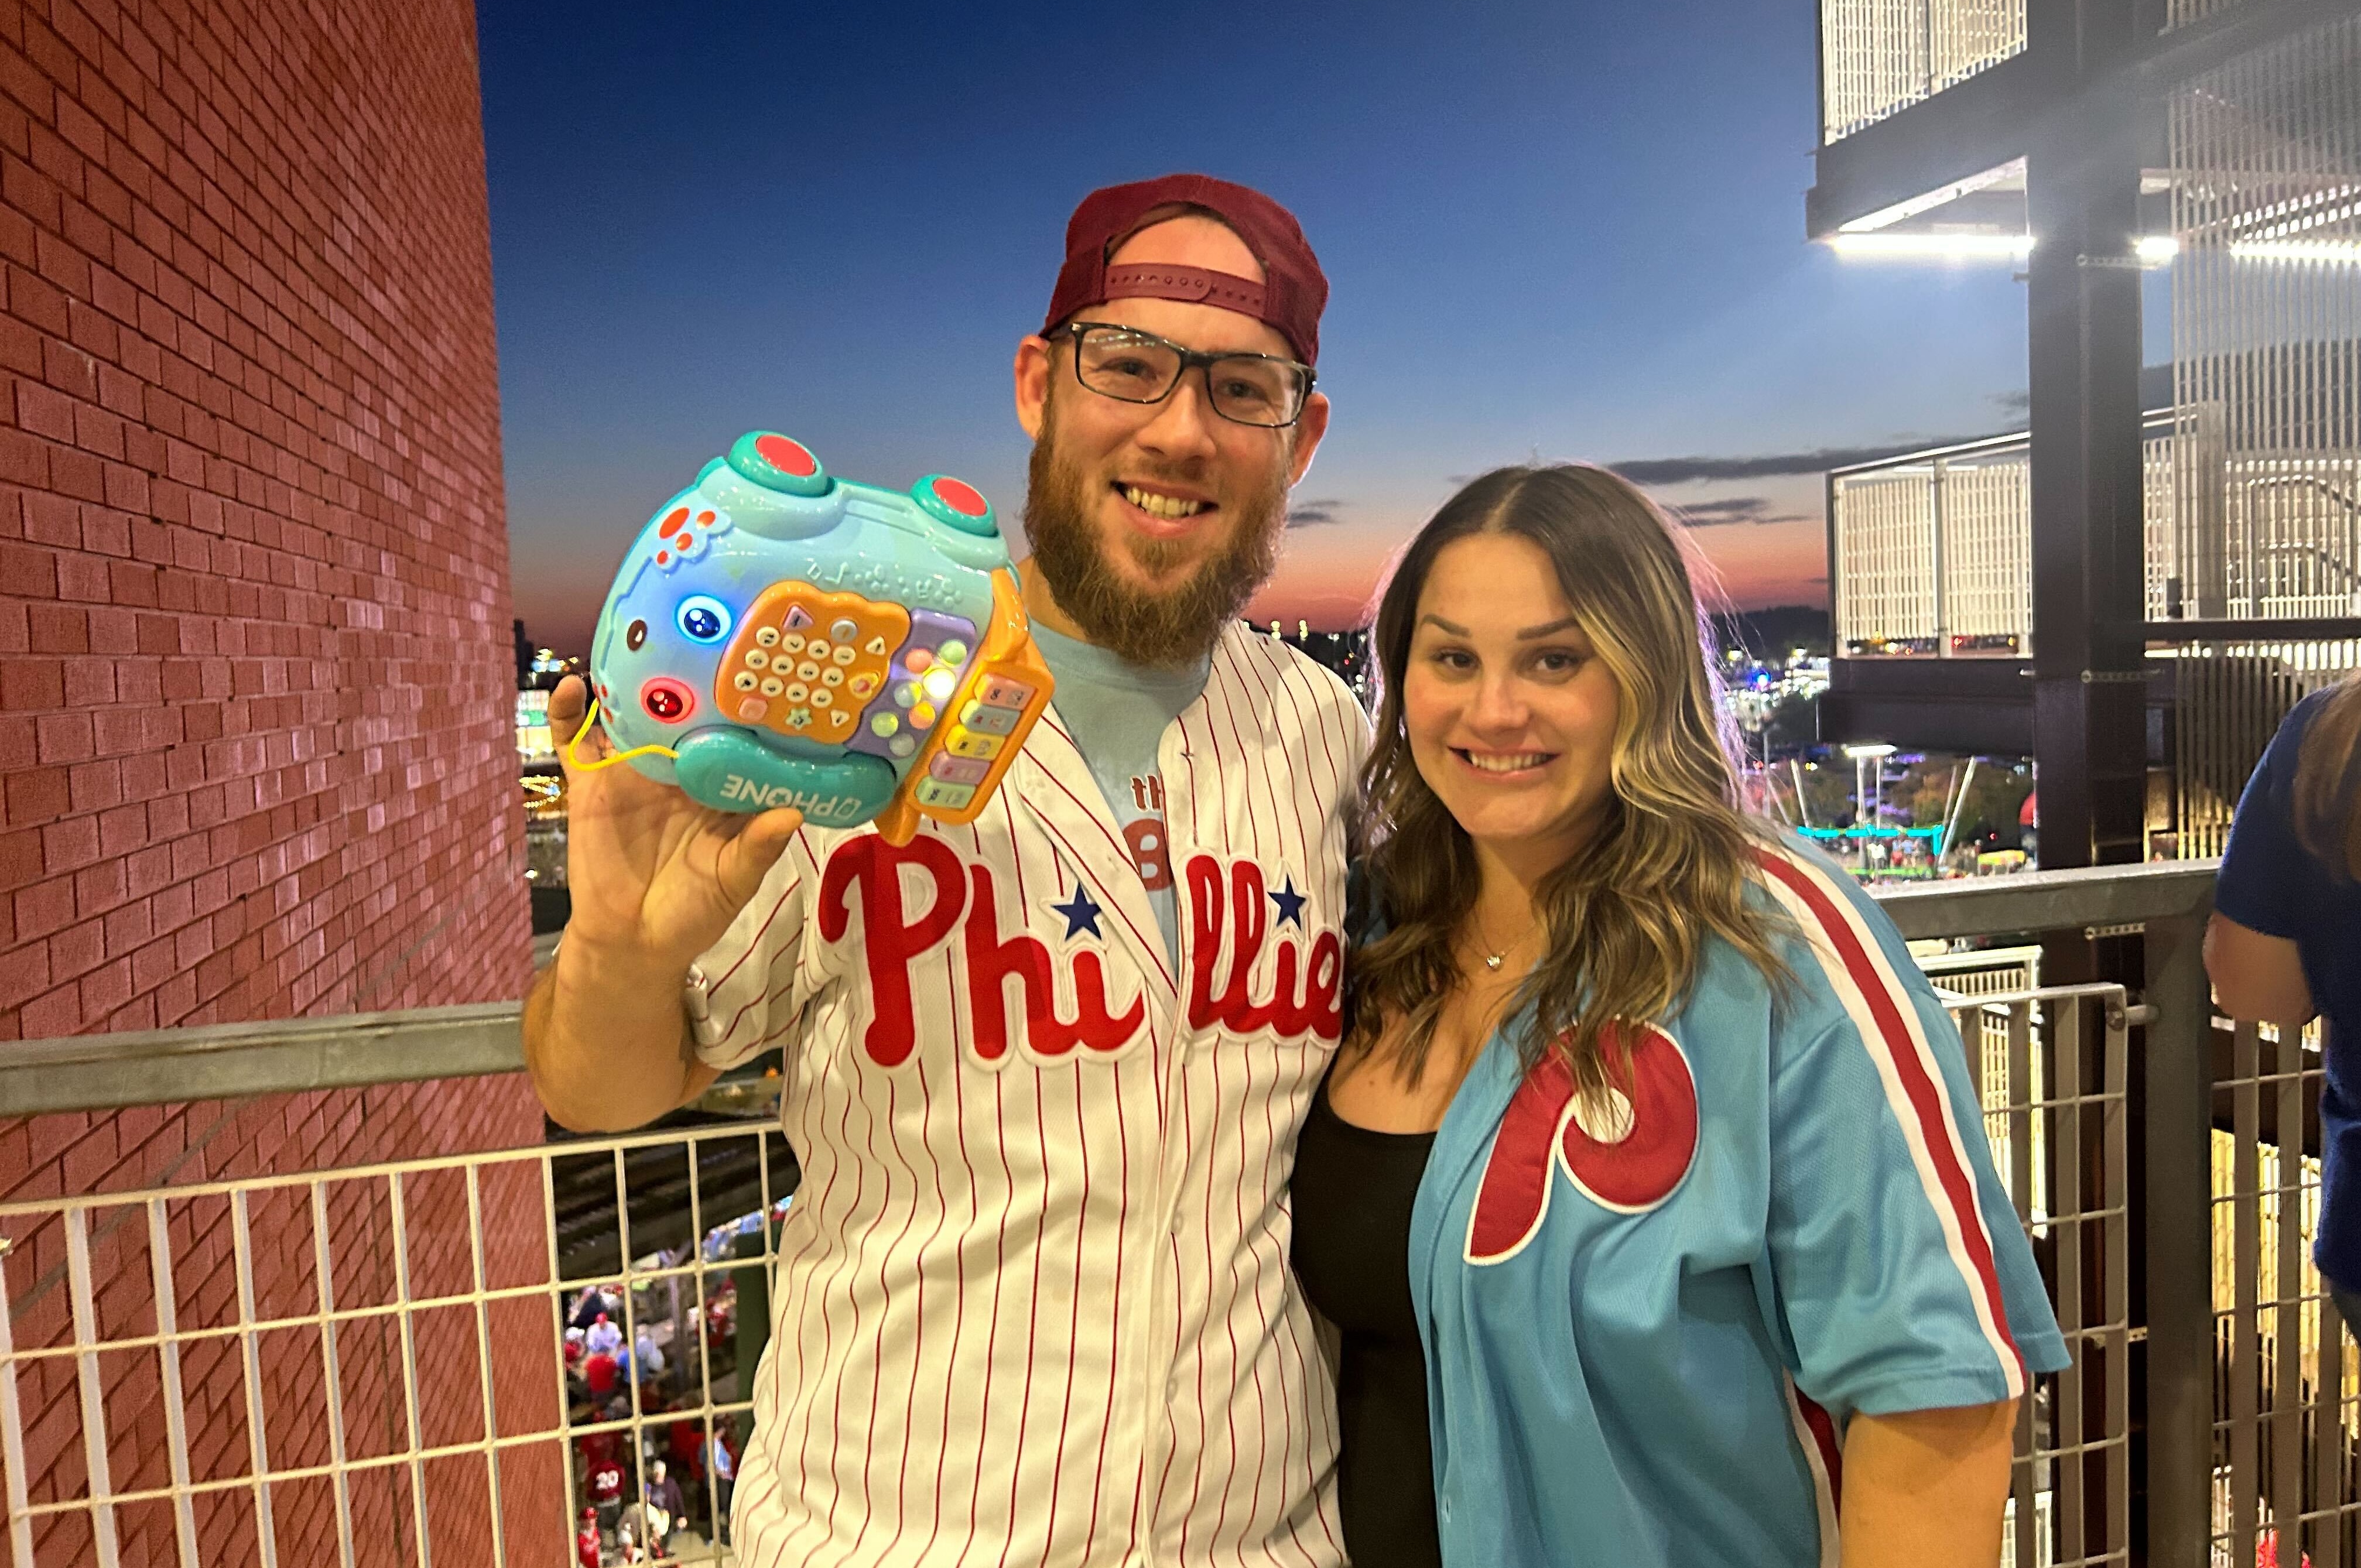 Phillies fans thrilled by win over Braves and move to NLCS